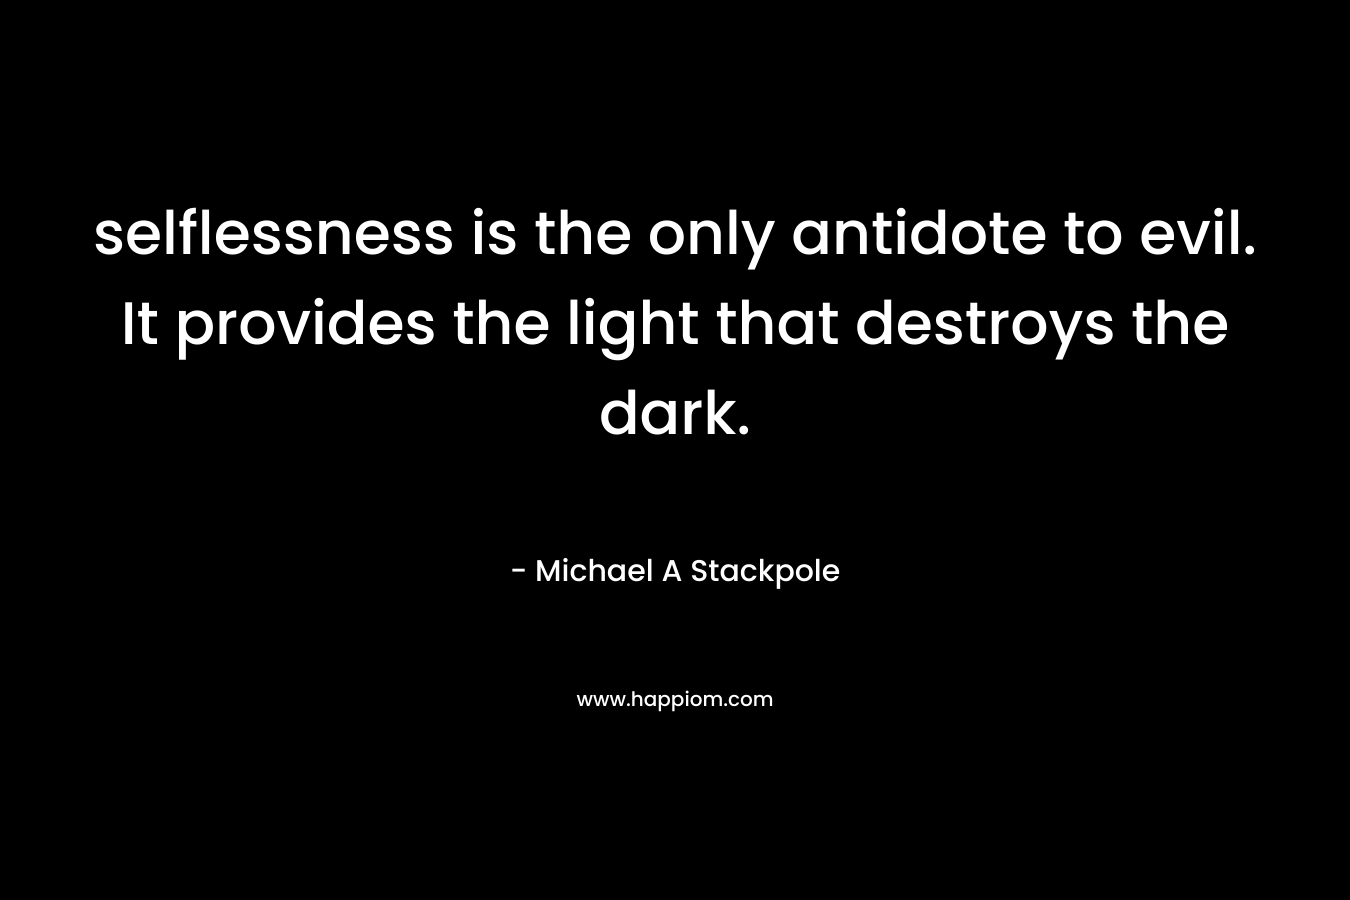 selflessness is the only antidote to evil. It provides the light that destroys the dark. – Michael A Stackpole